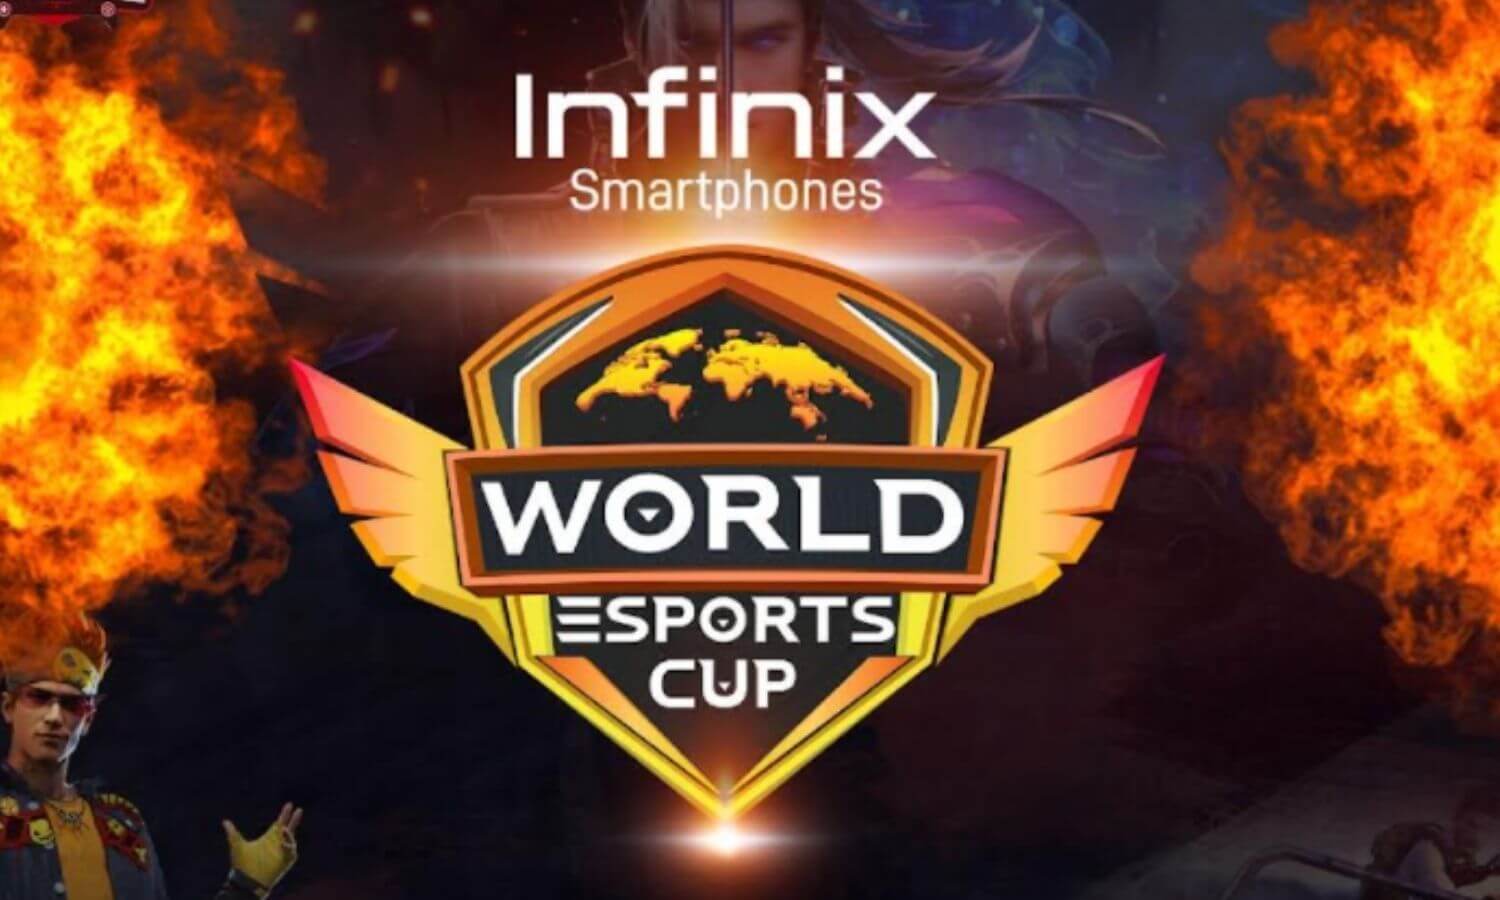 World Esports Cup 2021: India beat Pakistan and Nepal to win the title